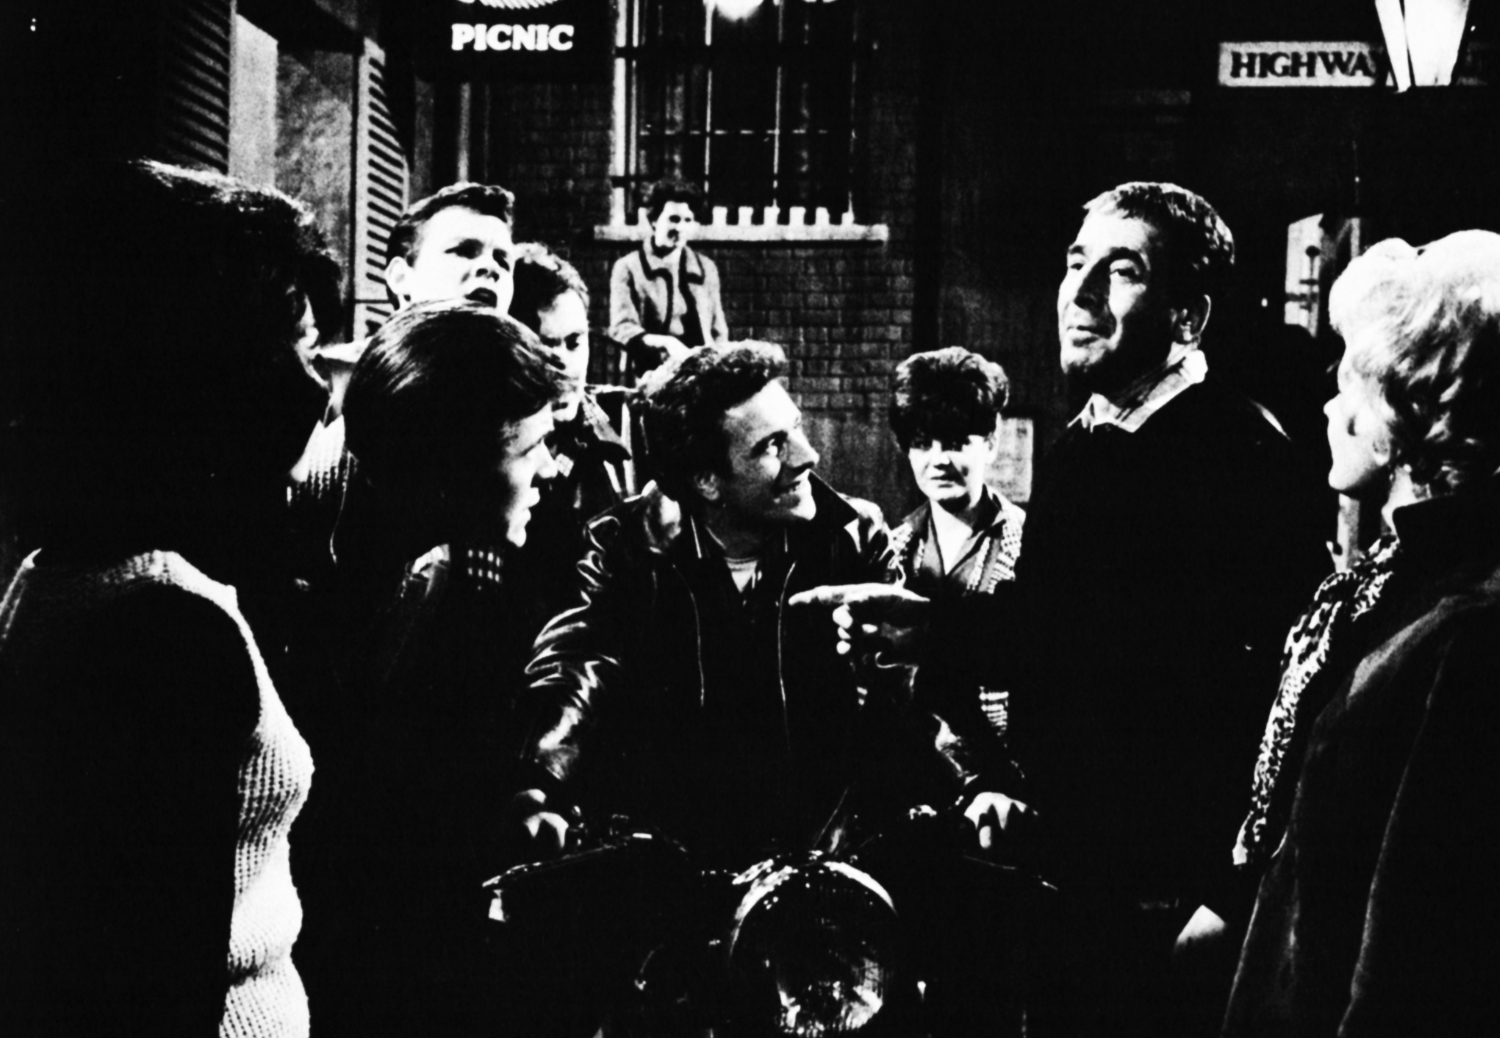 Teenagers and Leonard Sachs in a back alley